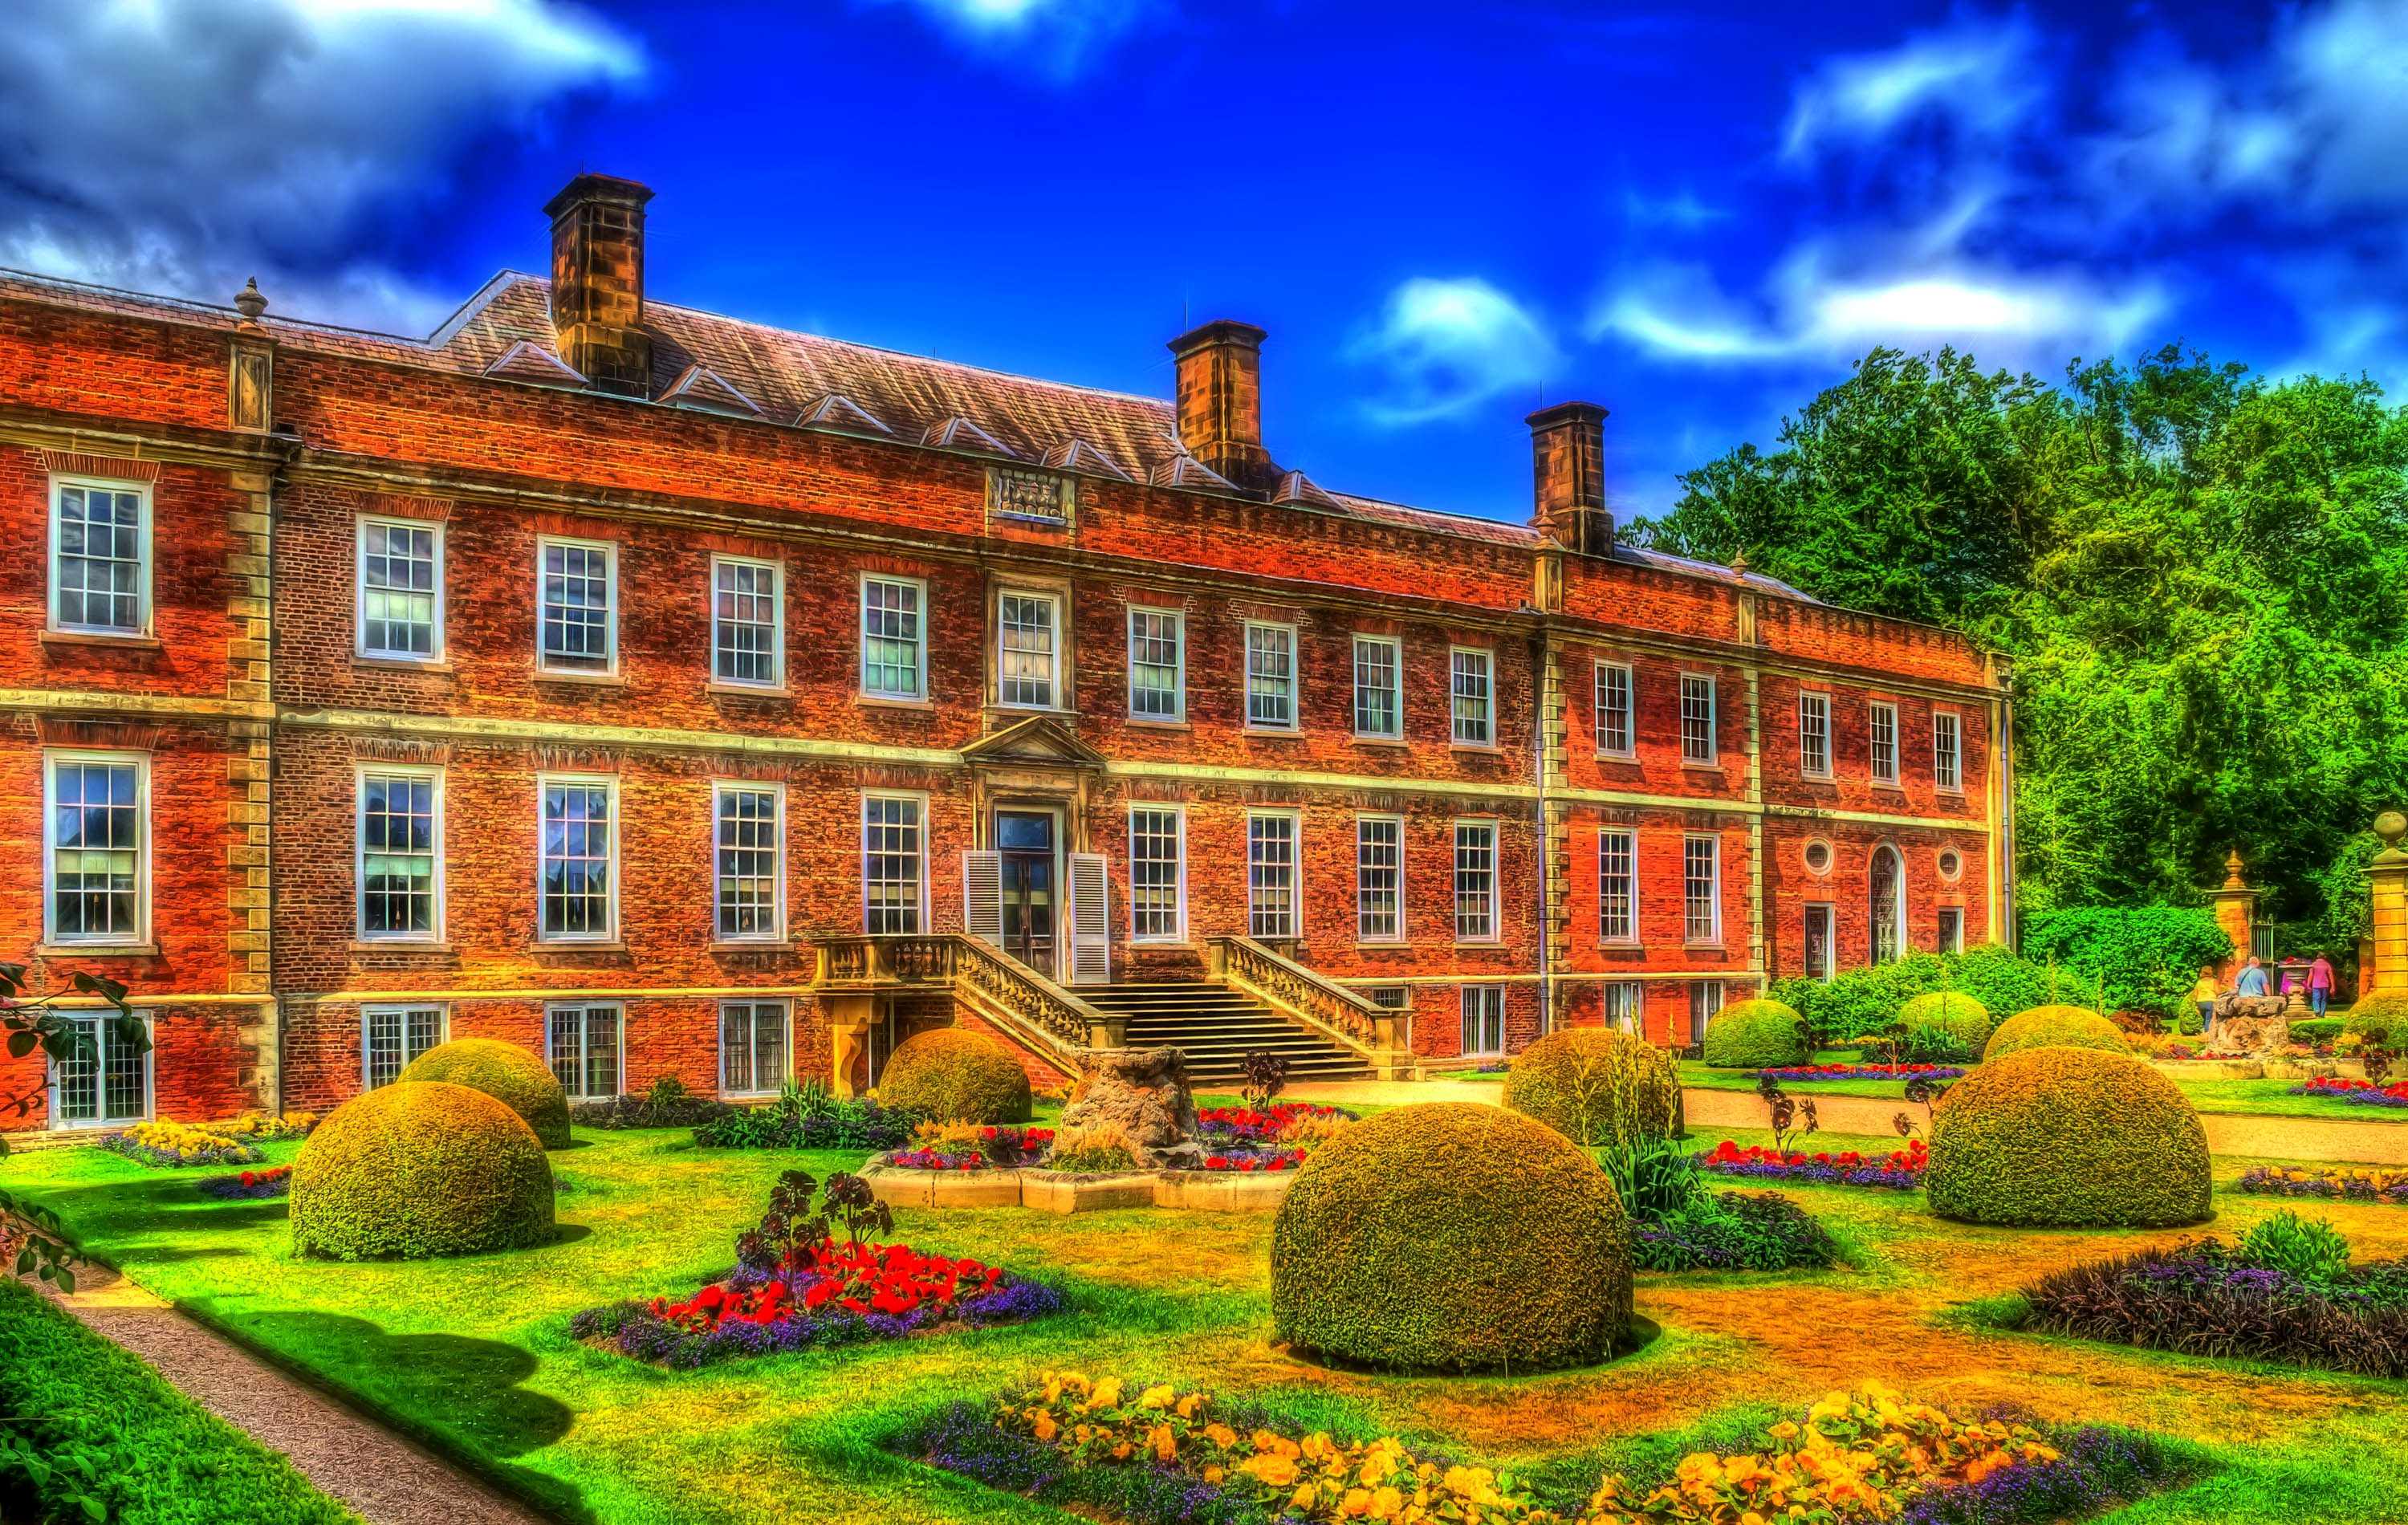 hdr, photography, building, bush, colorful, erddig hall, flower, garden, man made, wales